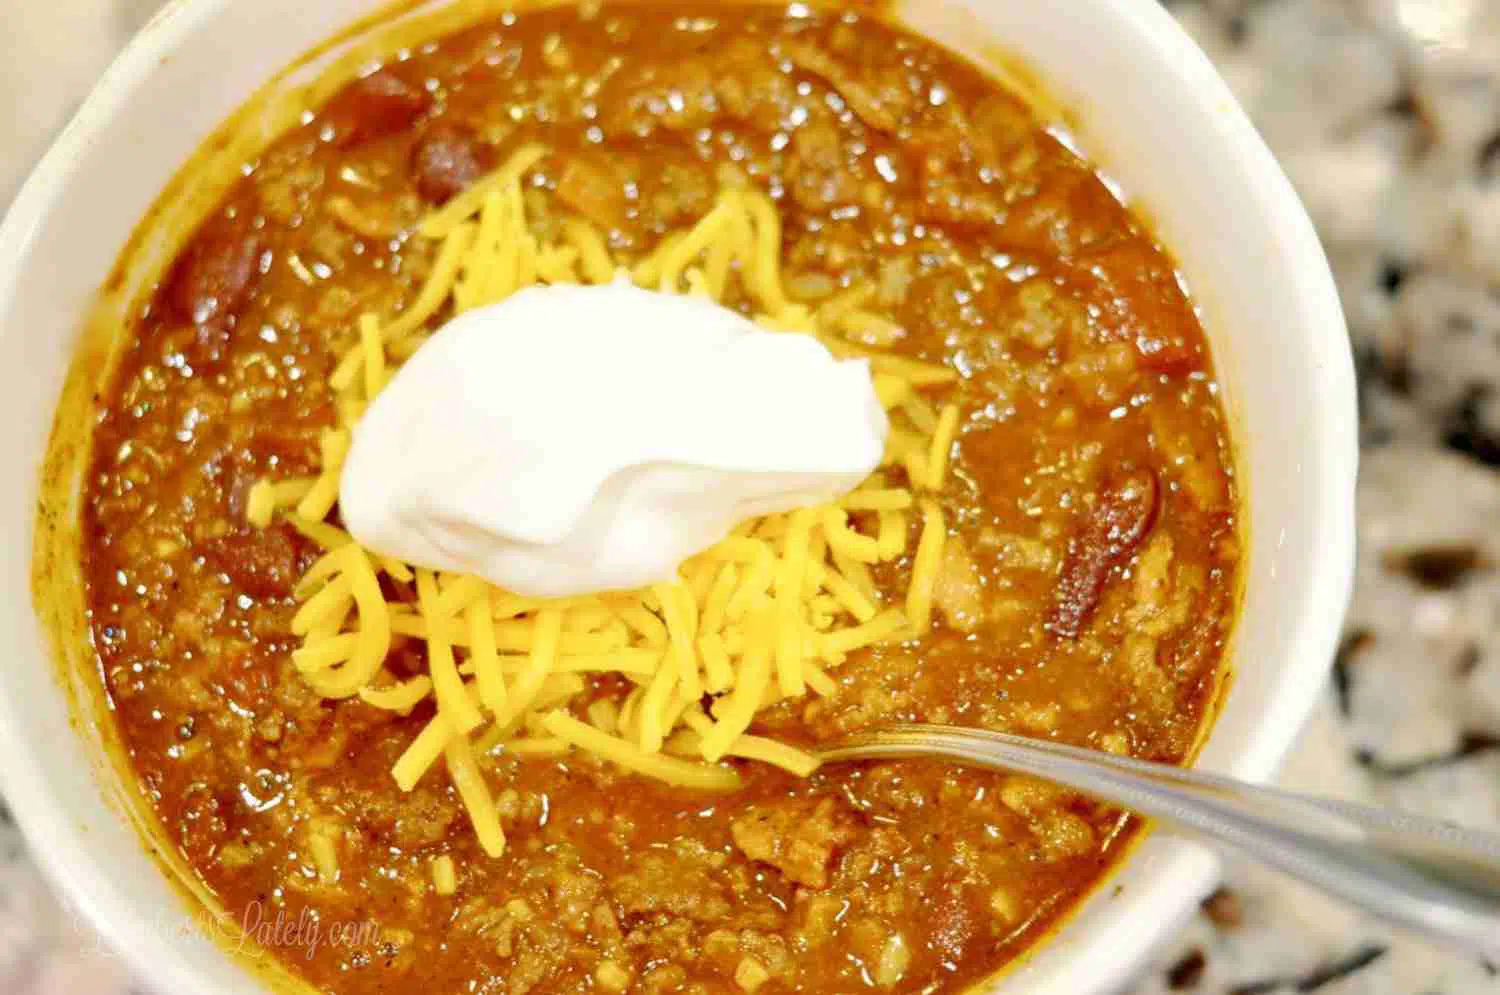 bowl of chili with sour cream and cheese on top.